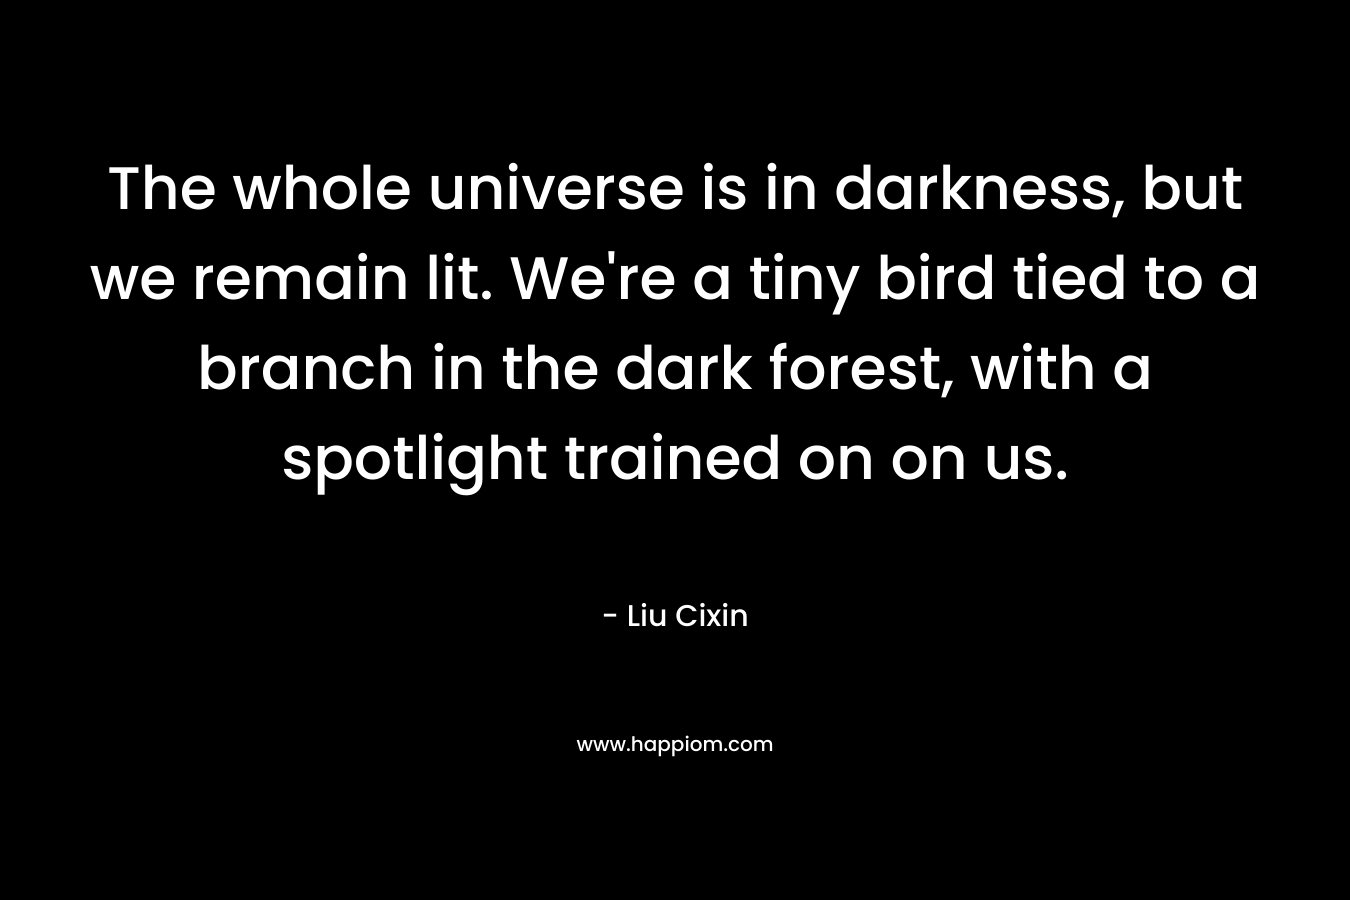 The whole universe is in darkness, but we remain lit. We're a tiny bird tied to a branch in the dark forest, with a spotlight trained on on us.